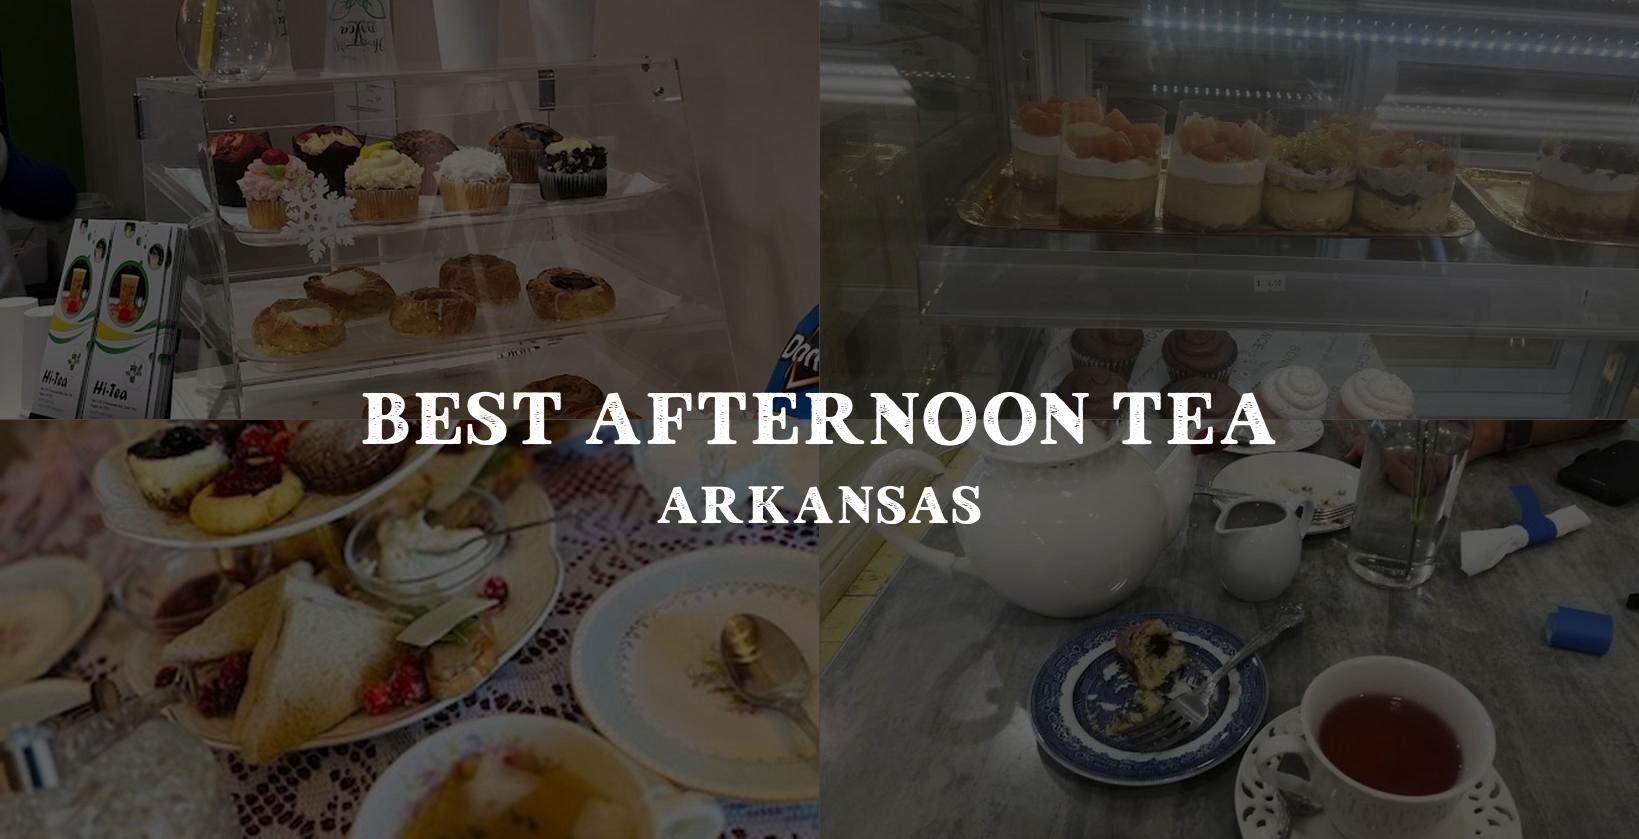 Choosing the perfect spot for afternoon tea in Arkansas